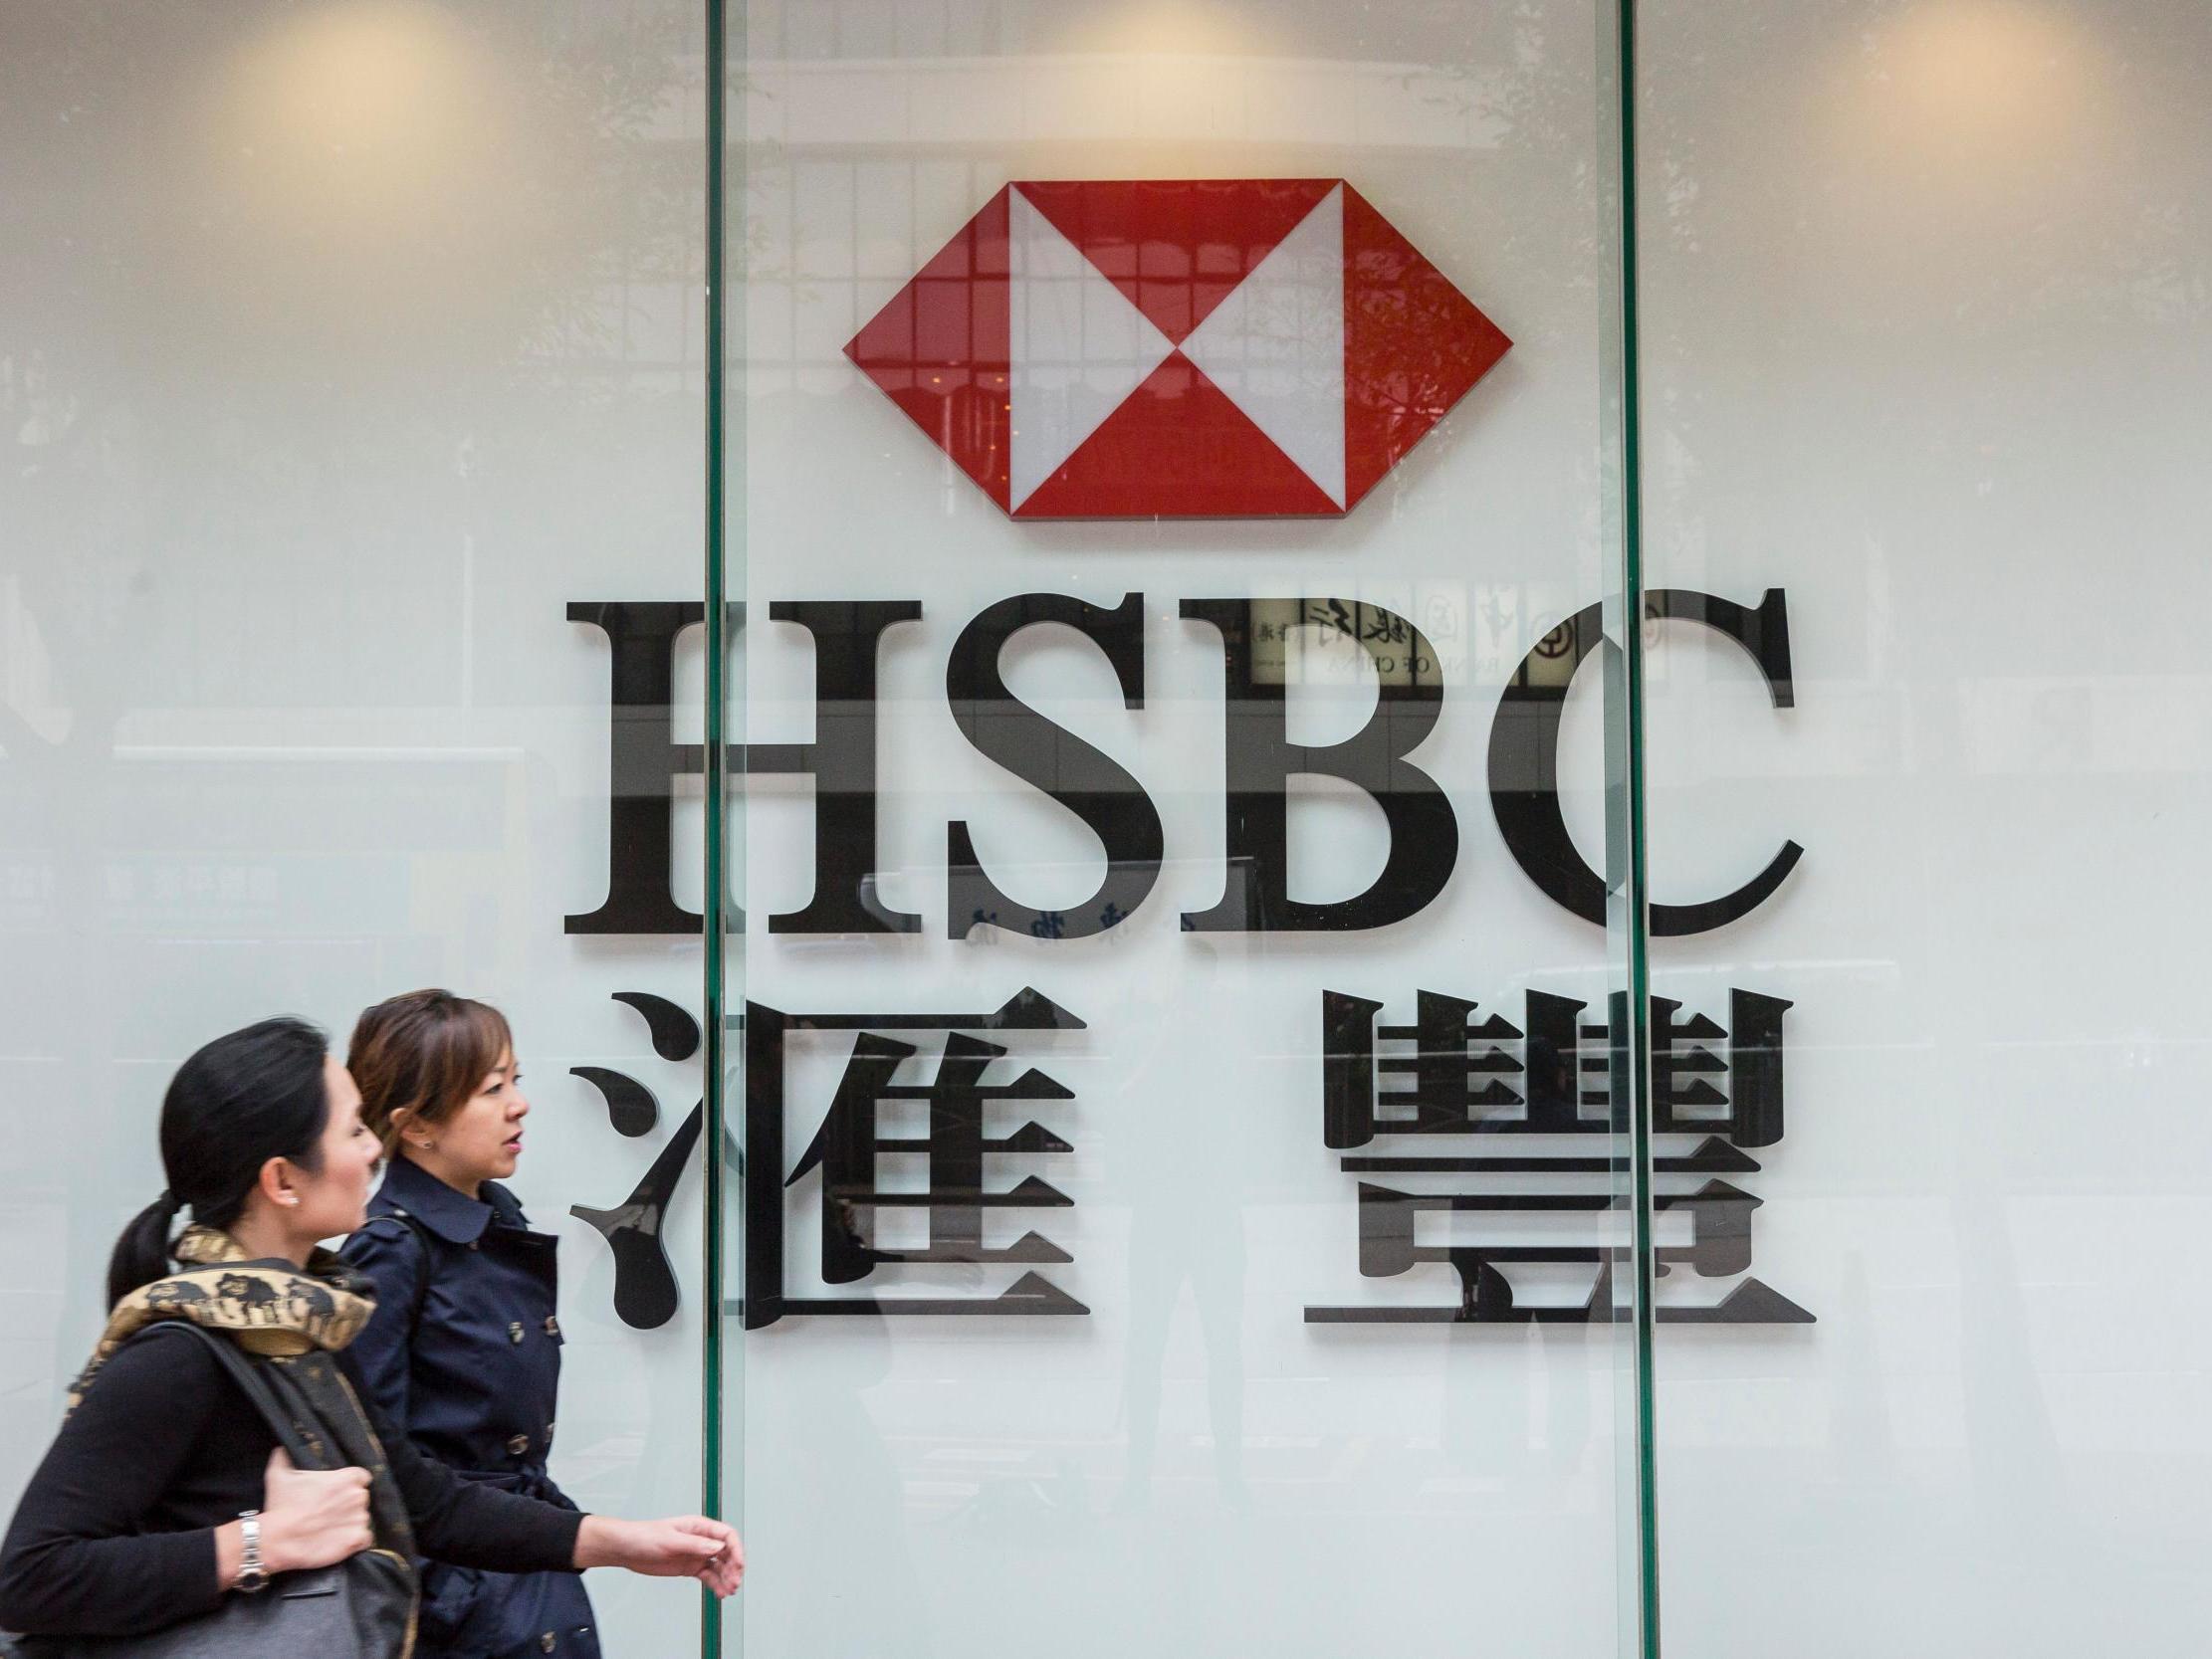 Pedestrians walk past HSBC in Hong Kong, where the bank was founded